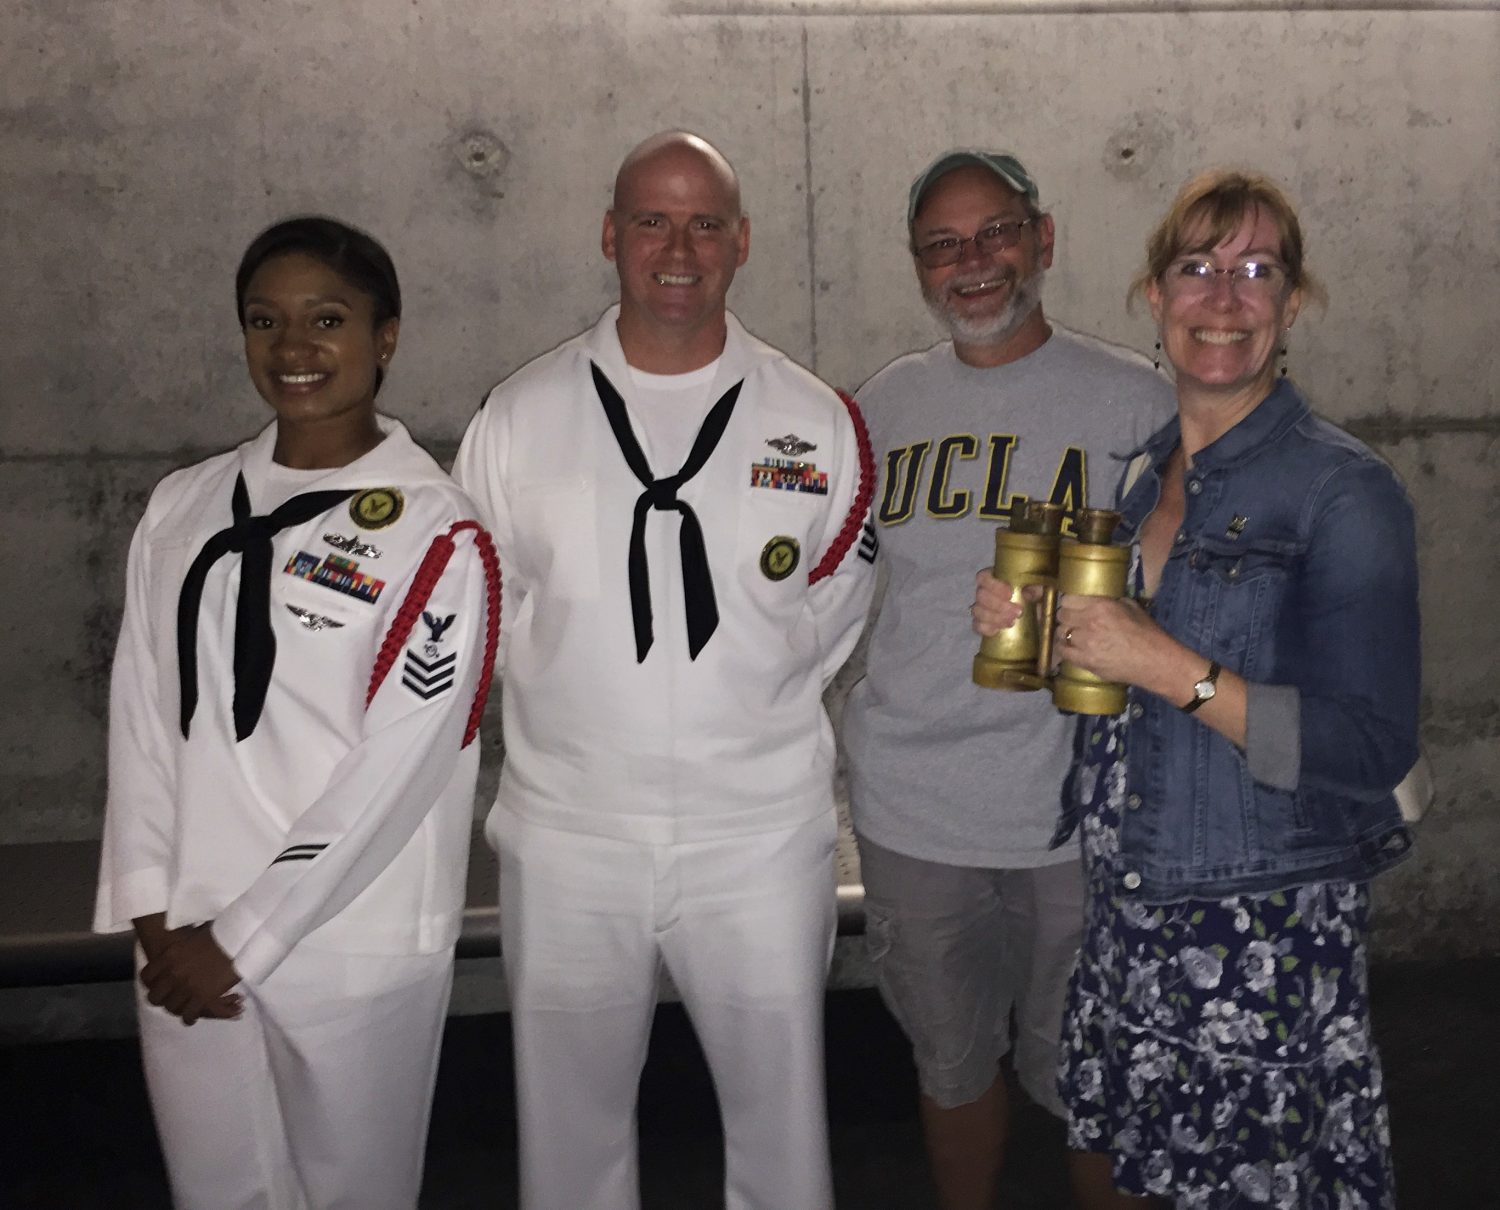 Two Navy docents from Great Lakes at the Chicago Museum of Science and Industry (our son's RDC is the gentleman in white), my husband, and me holding the actual binoculars from U-505! (Photo: Sarah Sundin, August 2016)